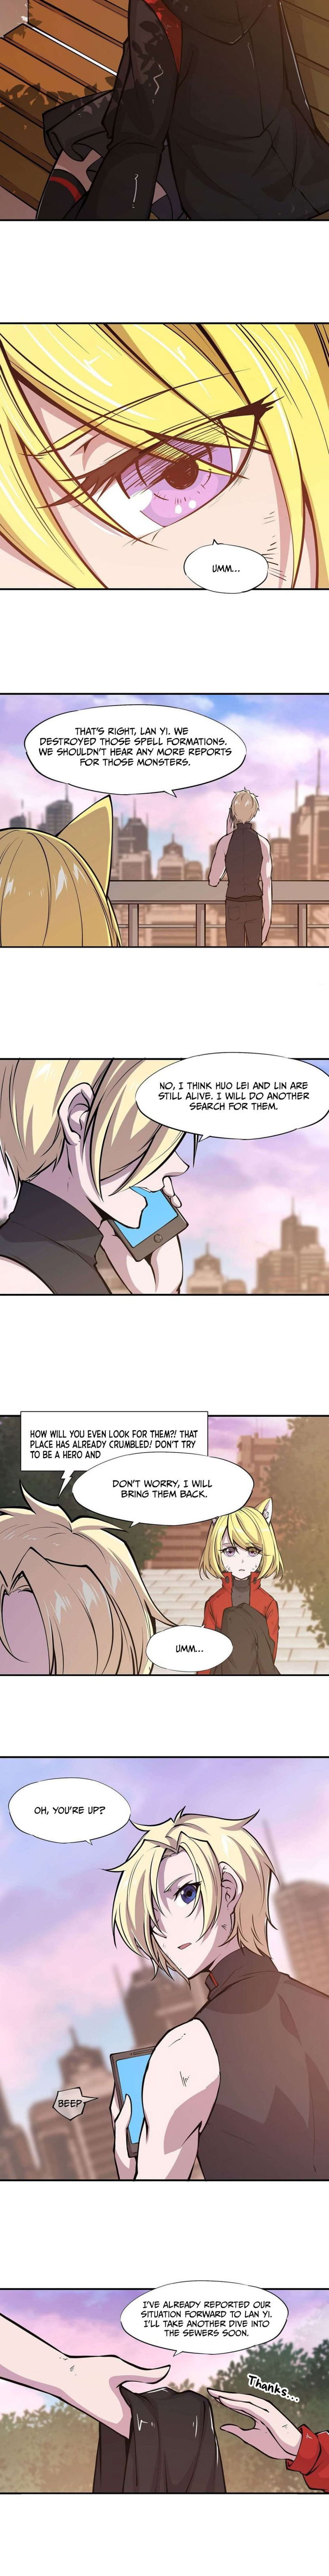 The Blood Princess and the Knight Chapter 74 page 6